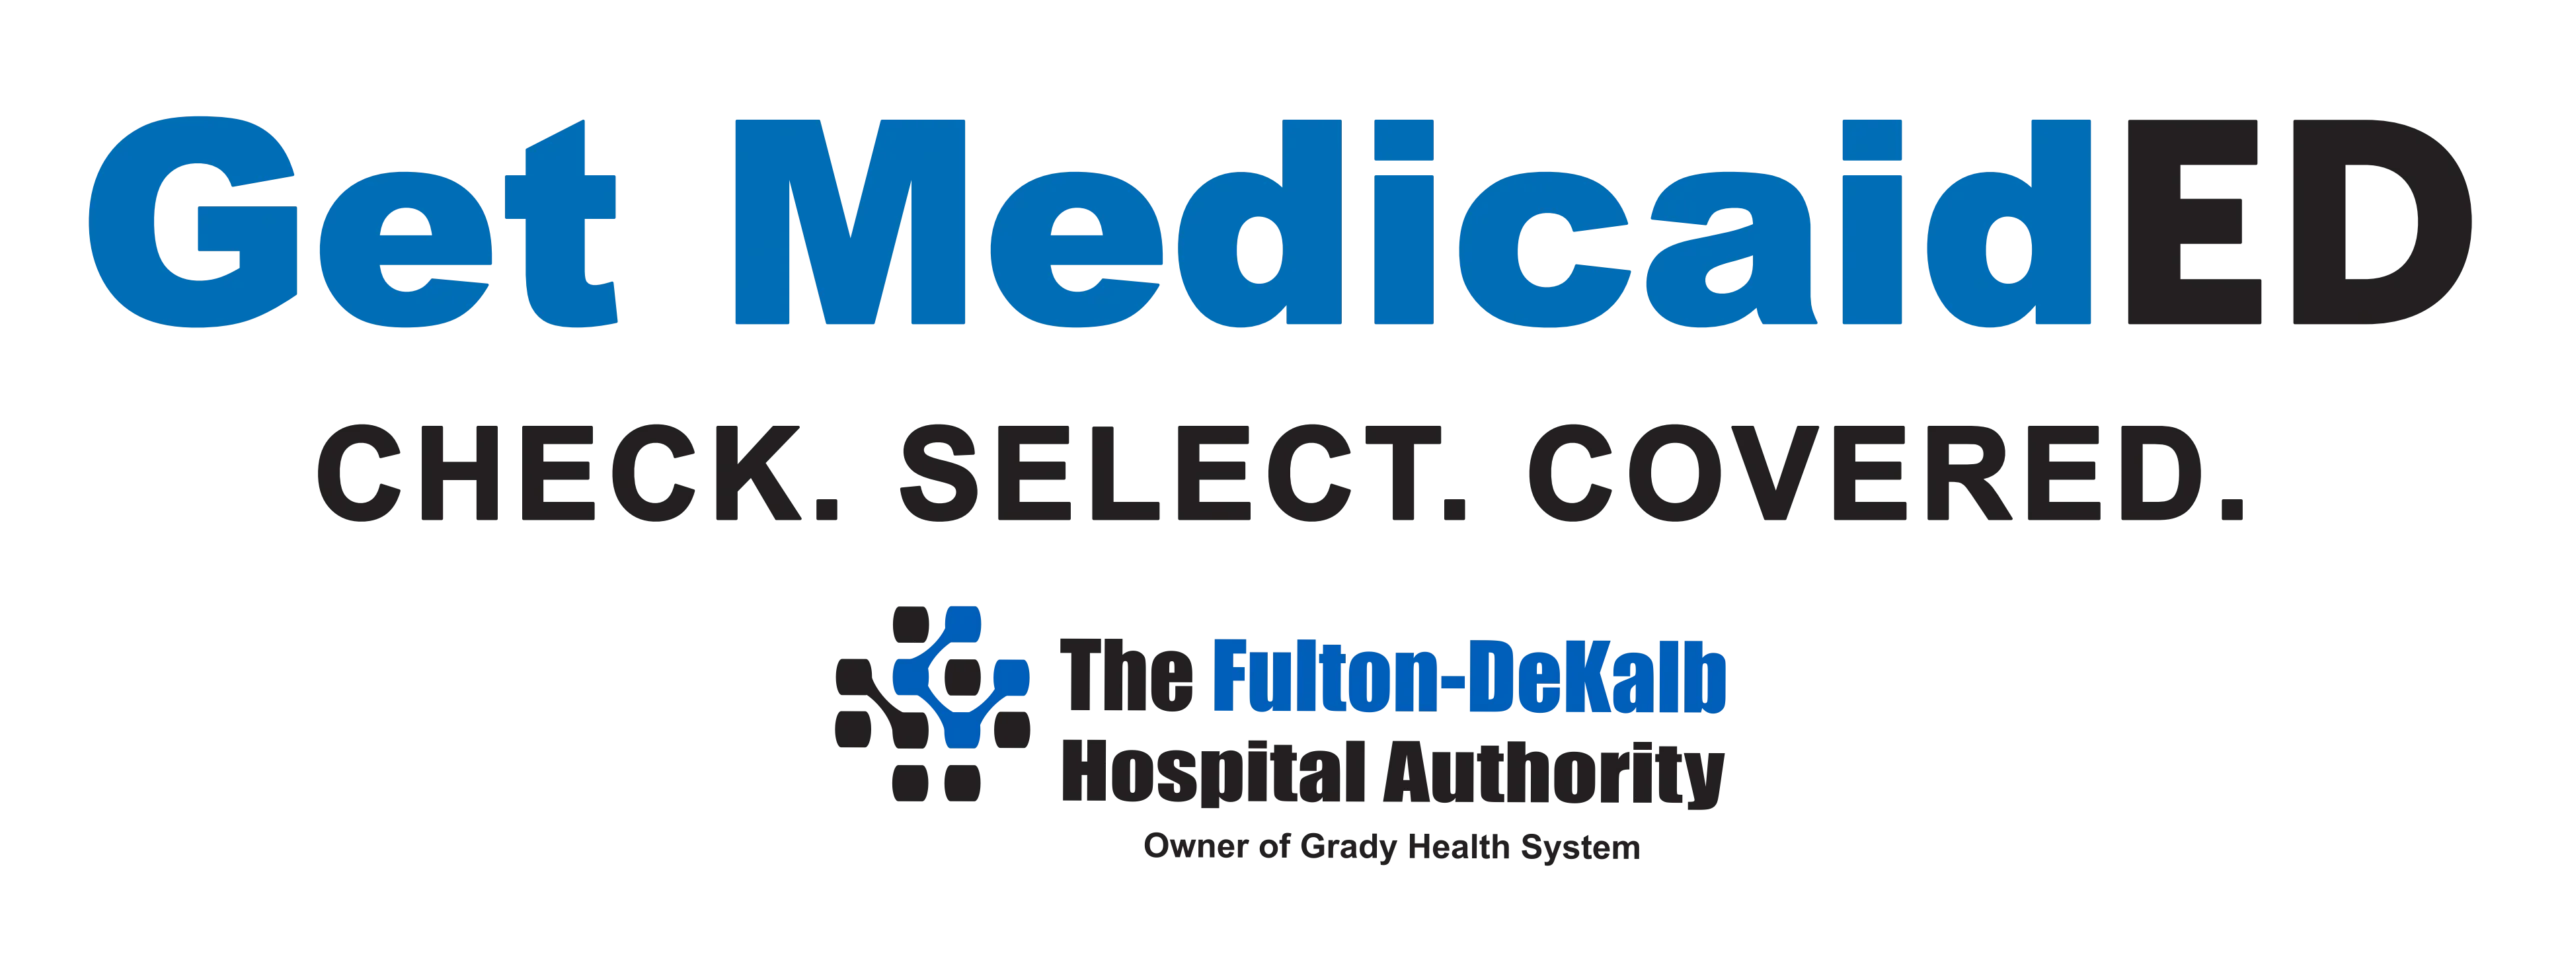 Get MedicaidEd logo. Get MedicaidEd: Check, Select, Covered.